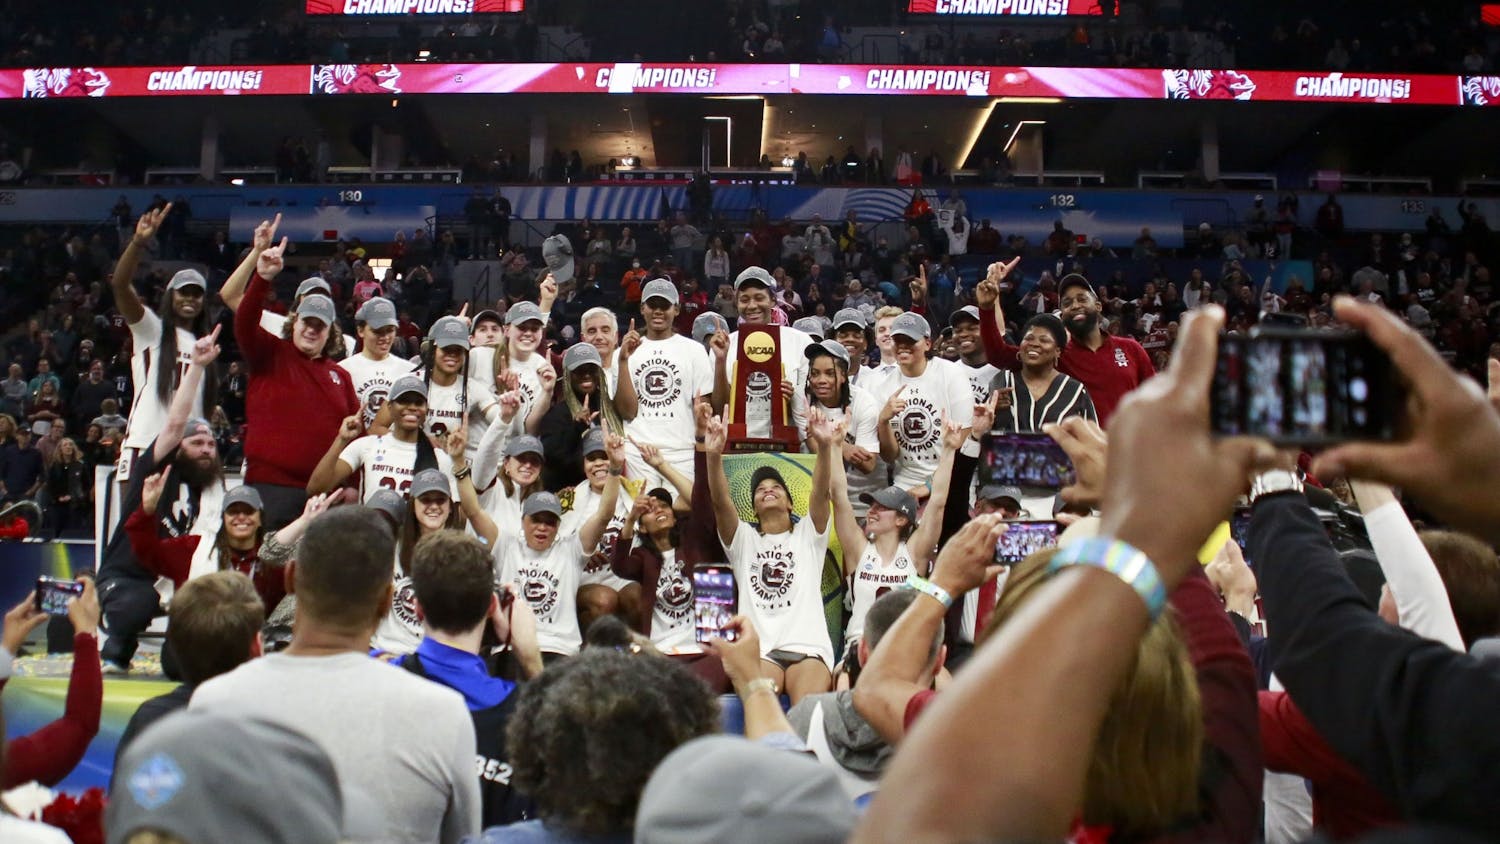 South Carolina womens basketball celebrates the Gamecocks' 64-49 victory over University of Connecticut, winning the 2022 National Championship on April 3, 2022.